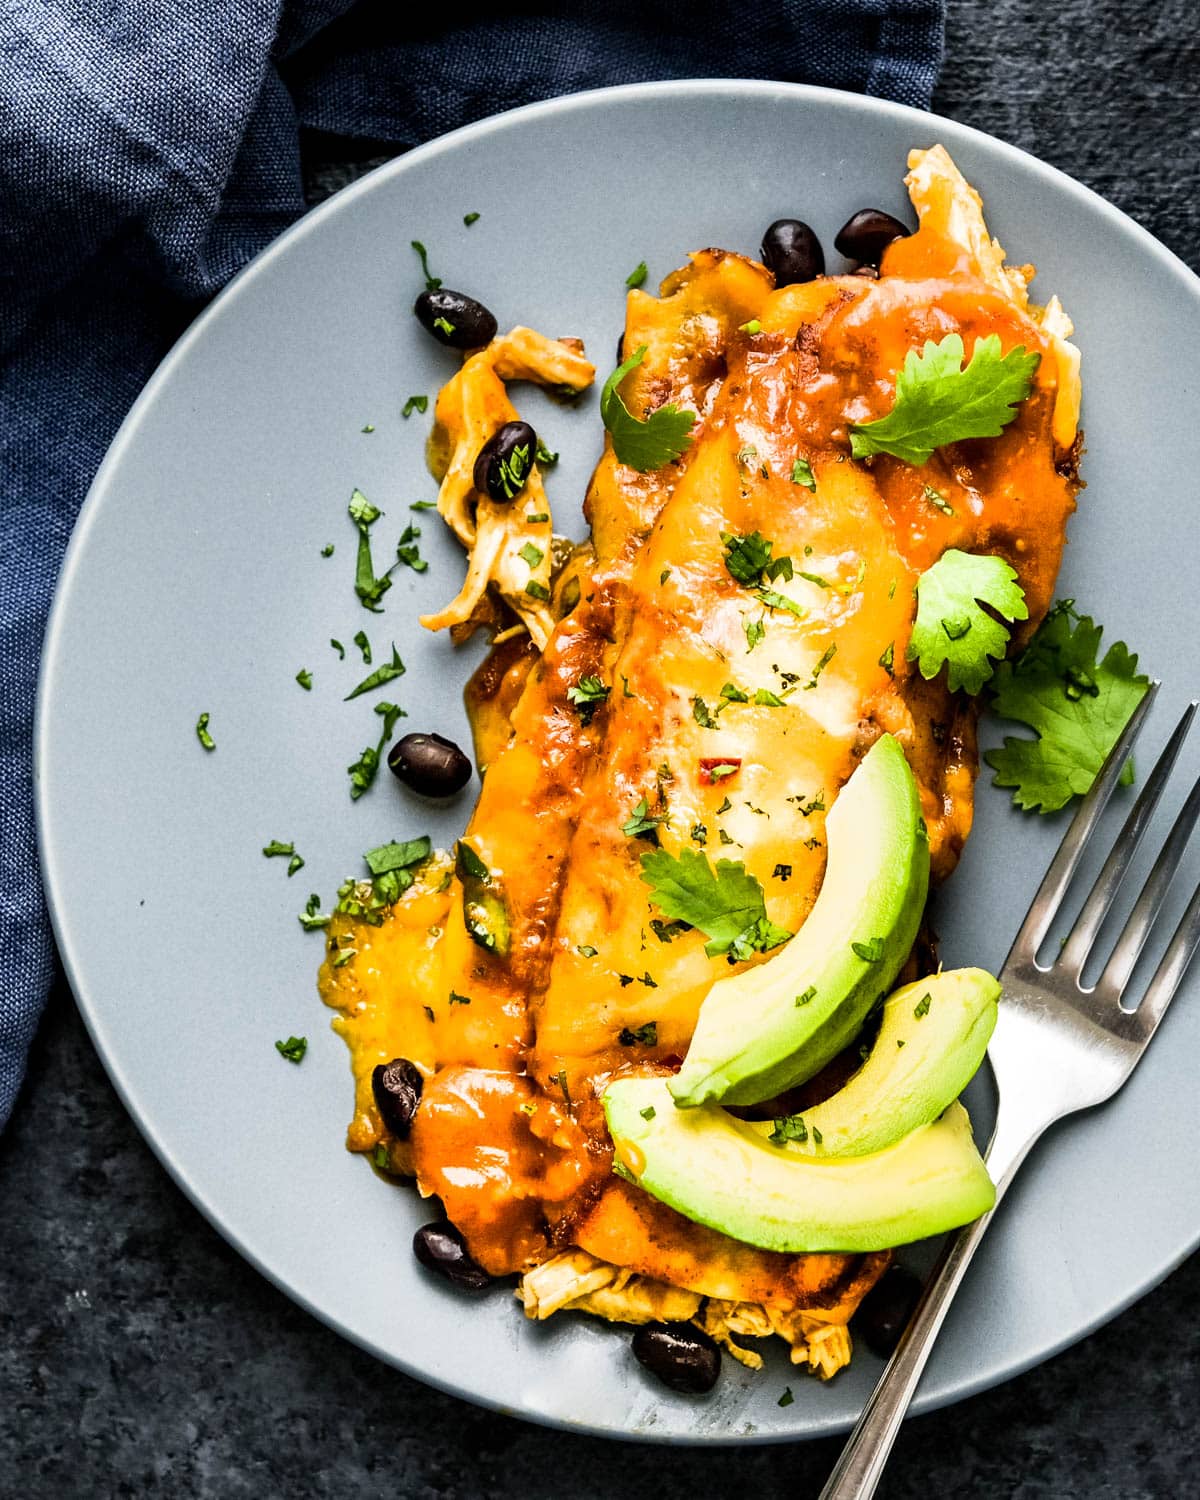 A chicken and black bean enchilada with slices of avocado and plenty of cheese.